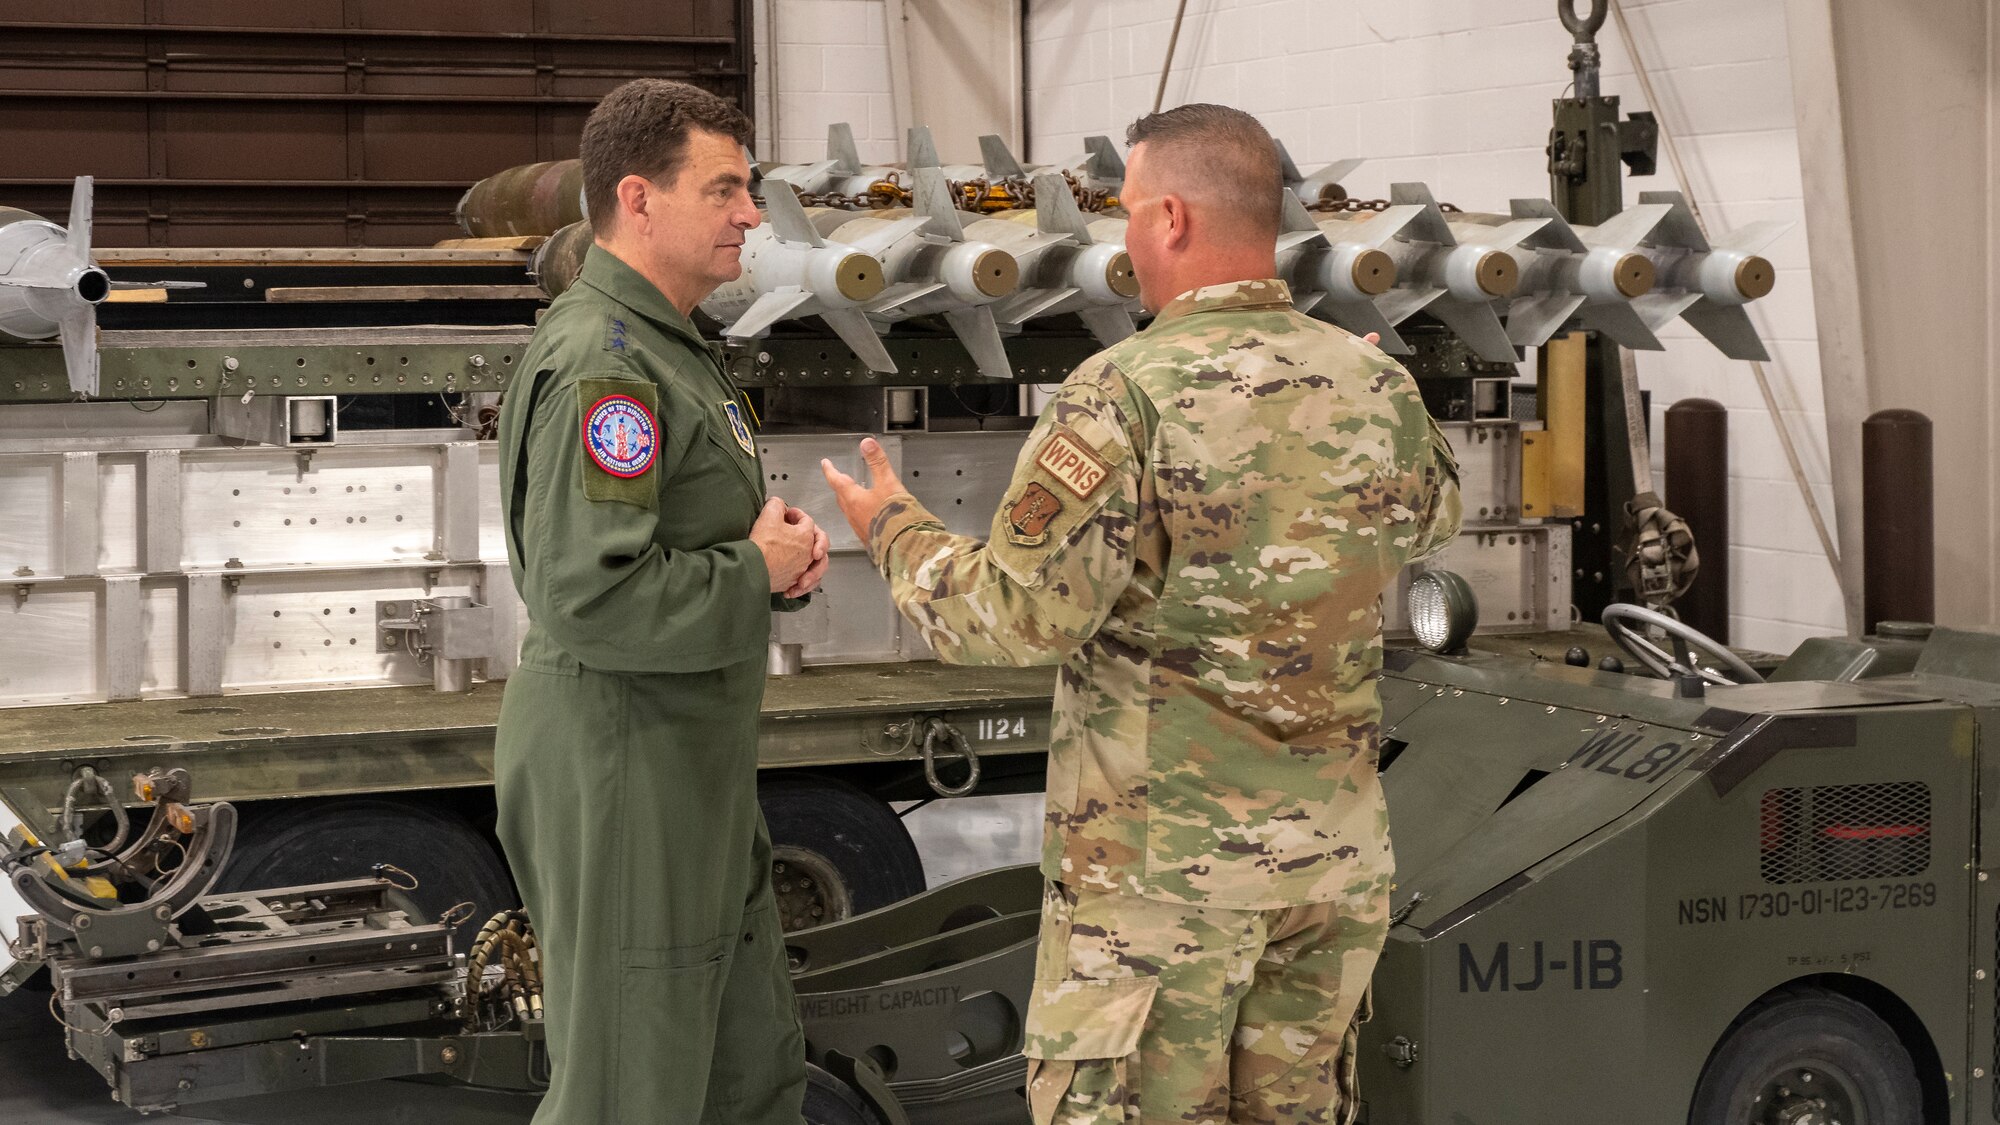 U.S. Air Force Master Sgt. Brock Schuld, 131st Aircraft Maintenance Squadron, 131st Bomb Wing, Missouri National Guard, discusses the Weapons Load Trainer at Whiteman Air Force Base, Missouri, with Lt. Gen. Michael Loh, director, Air National Guard, May 13, 2022. The trainer allows Team Whiteman Airmen to learn all aspects of the munitions enterprise for the B-2 Spirit bomber in a safe and controlled environment. (U.S. Air National Guard photo by Master Sgt. John E. Hillier)